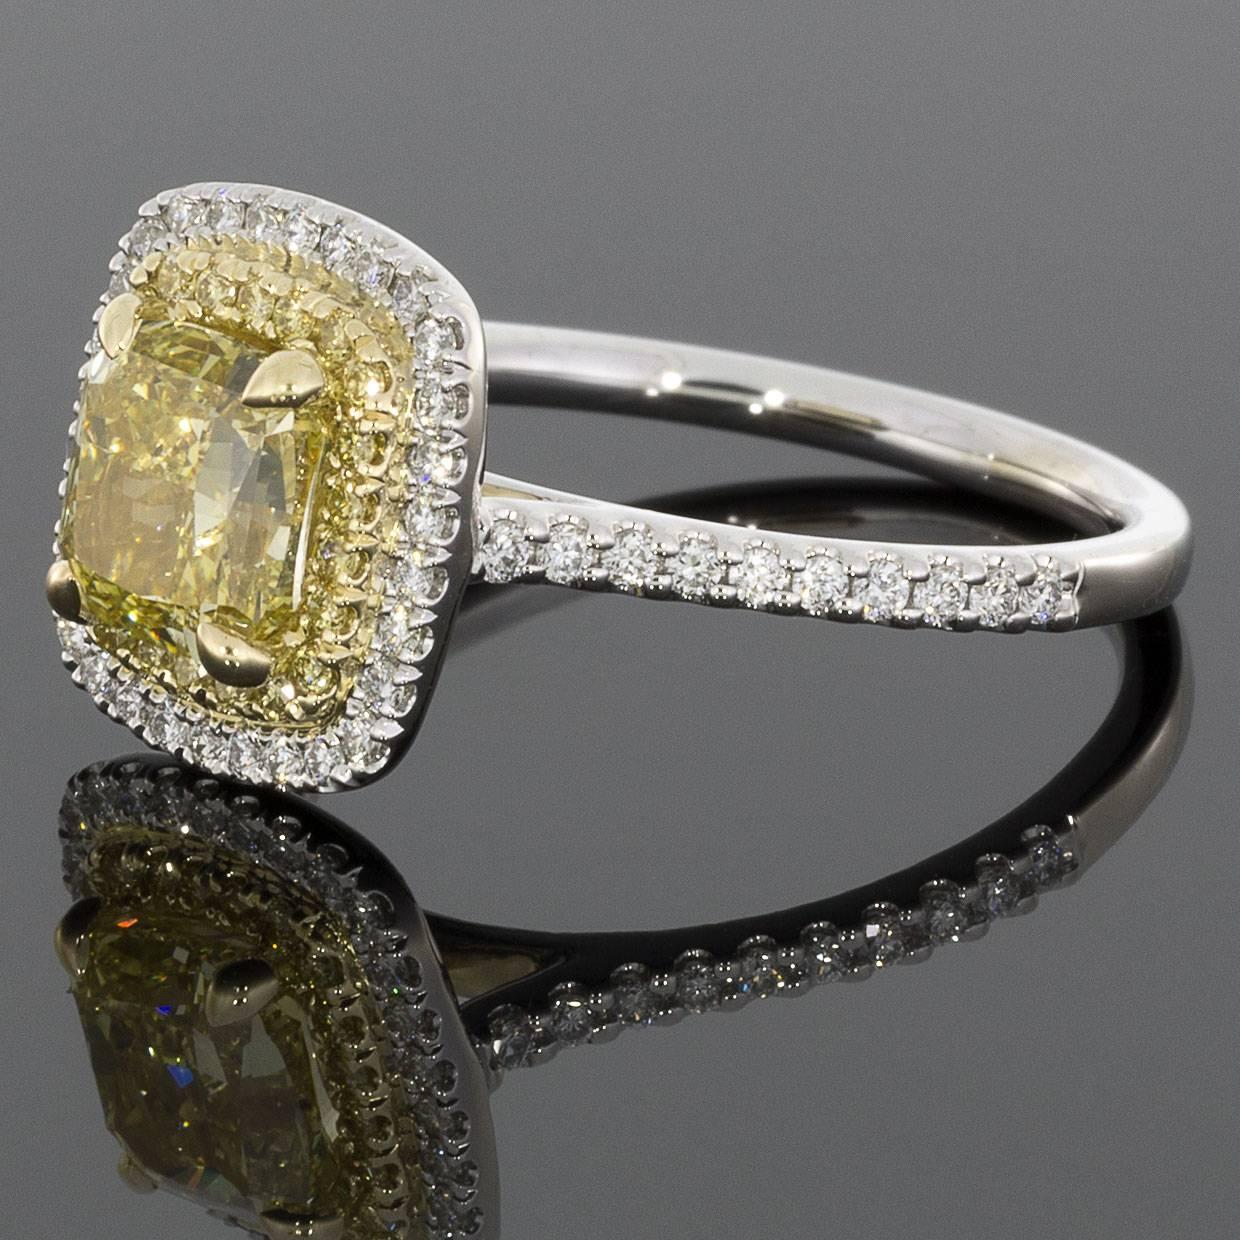 This alluring ring features a classic yet stunning halo design. This design showcases the stunning 1.50 carat, fancy yellow, cushion brilliant cut center diamond that is prong set in a yellow gold head on a custom made ring. This gorgeous center